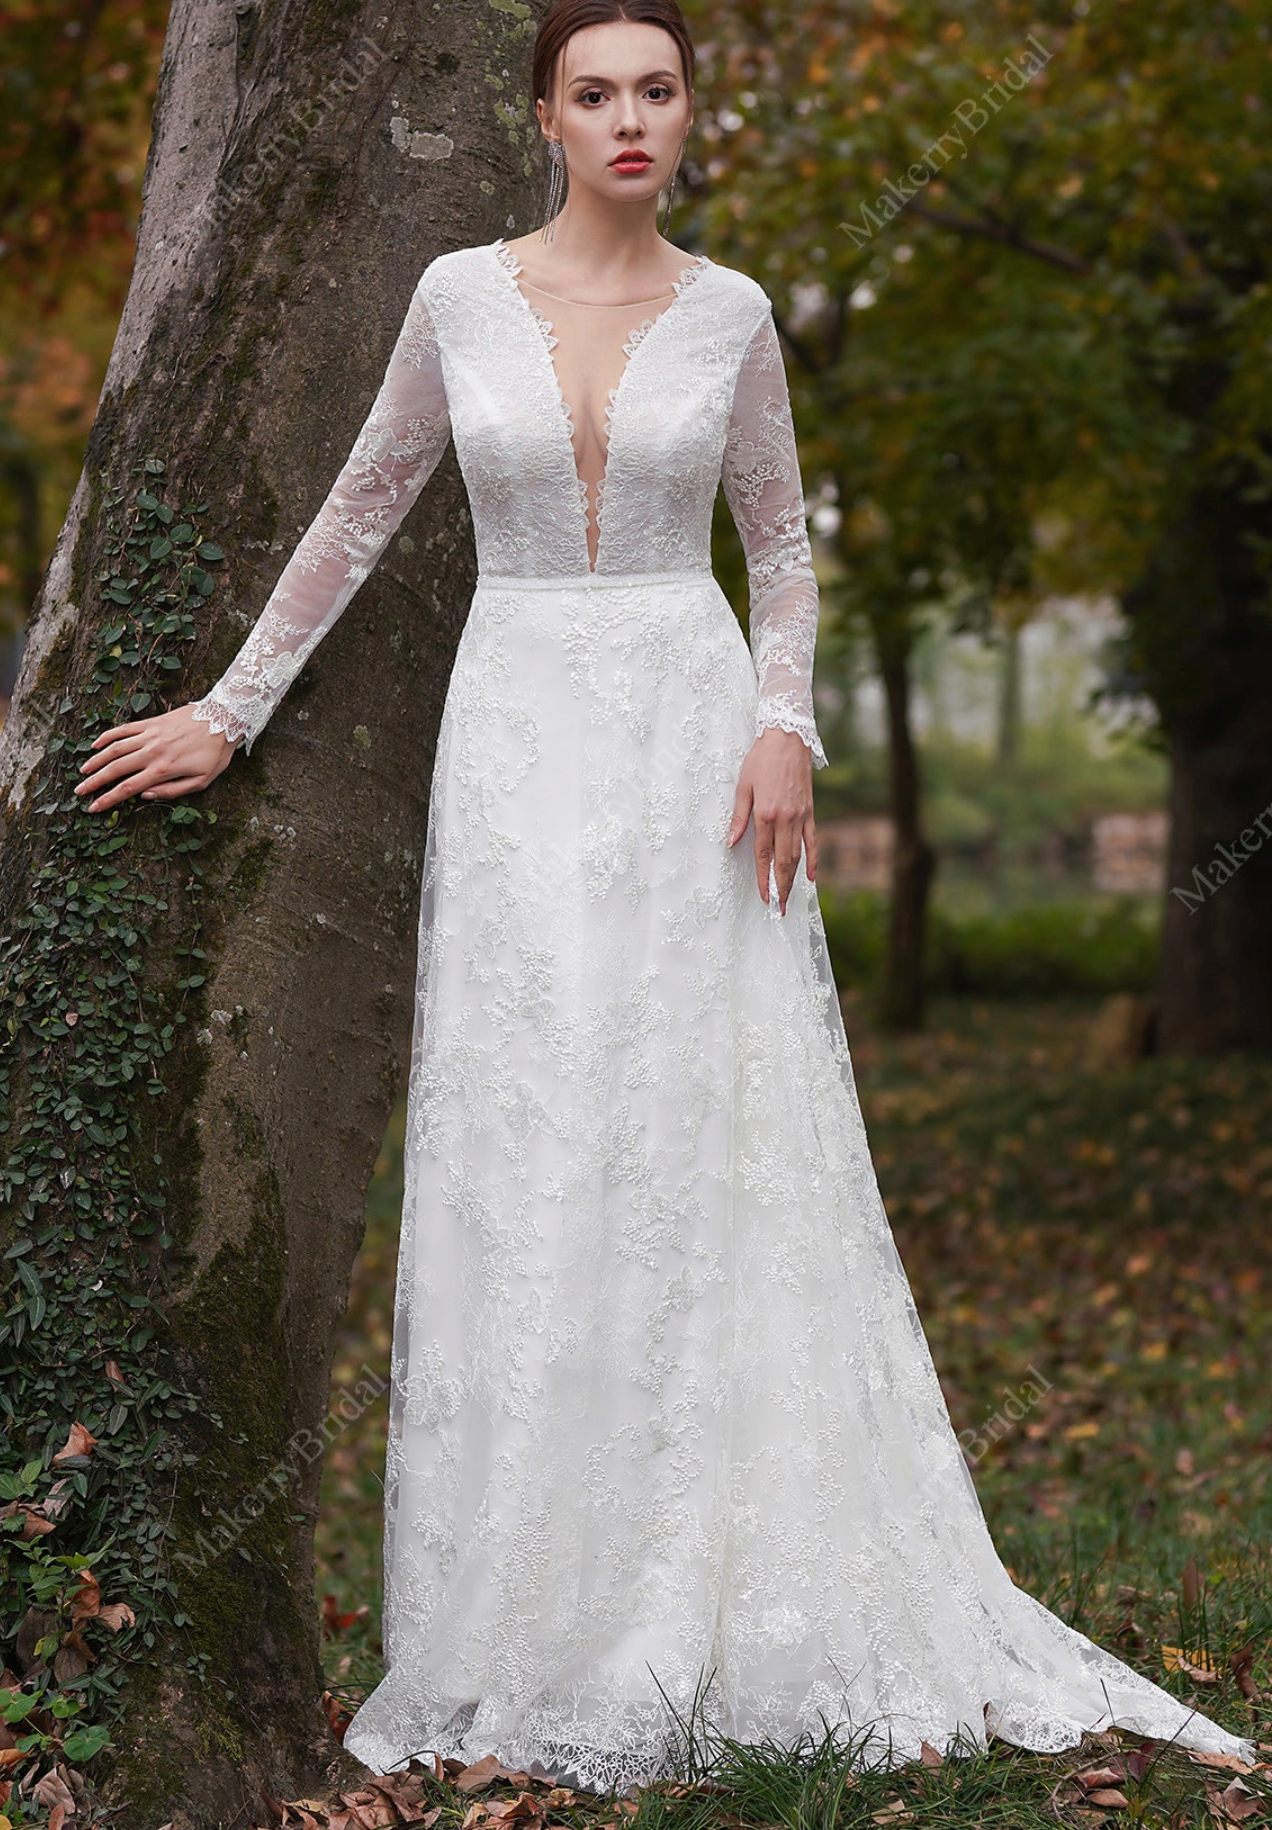 Lace Gown With Long Sleeves